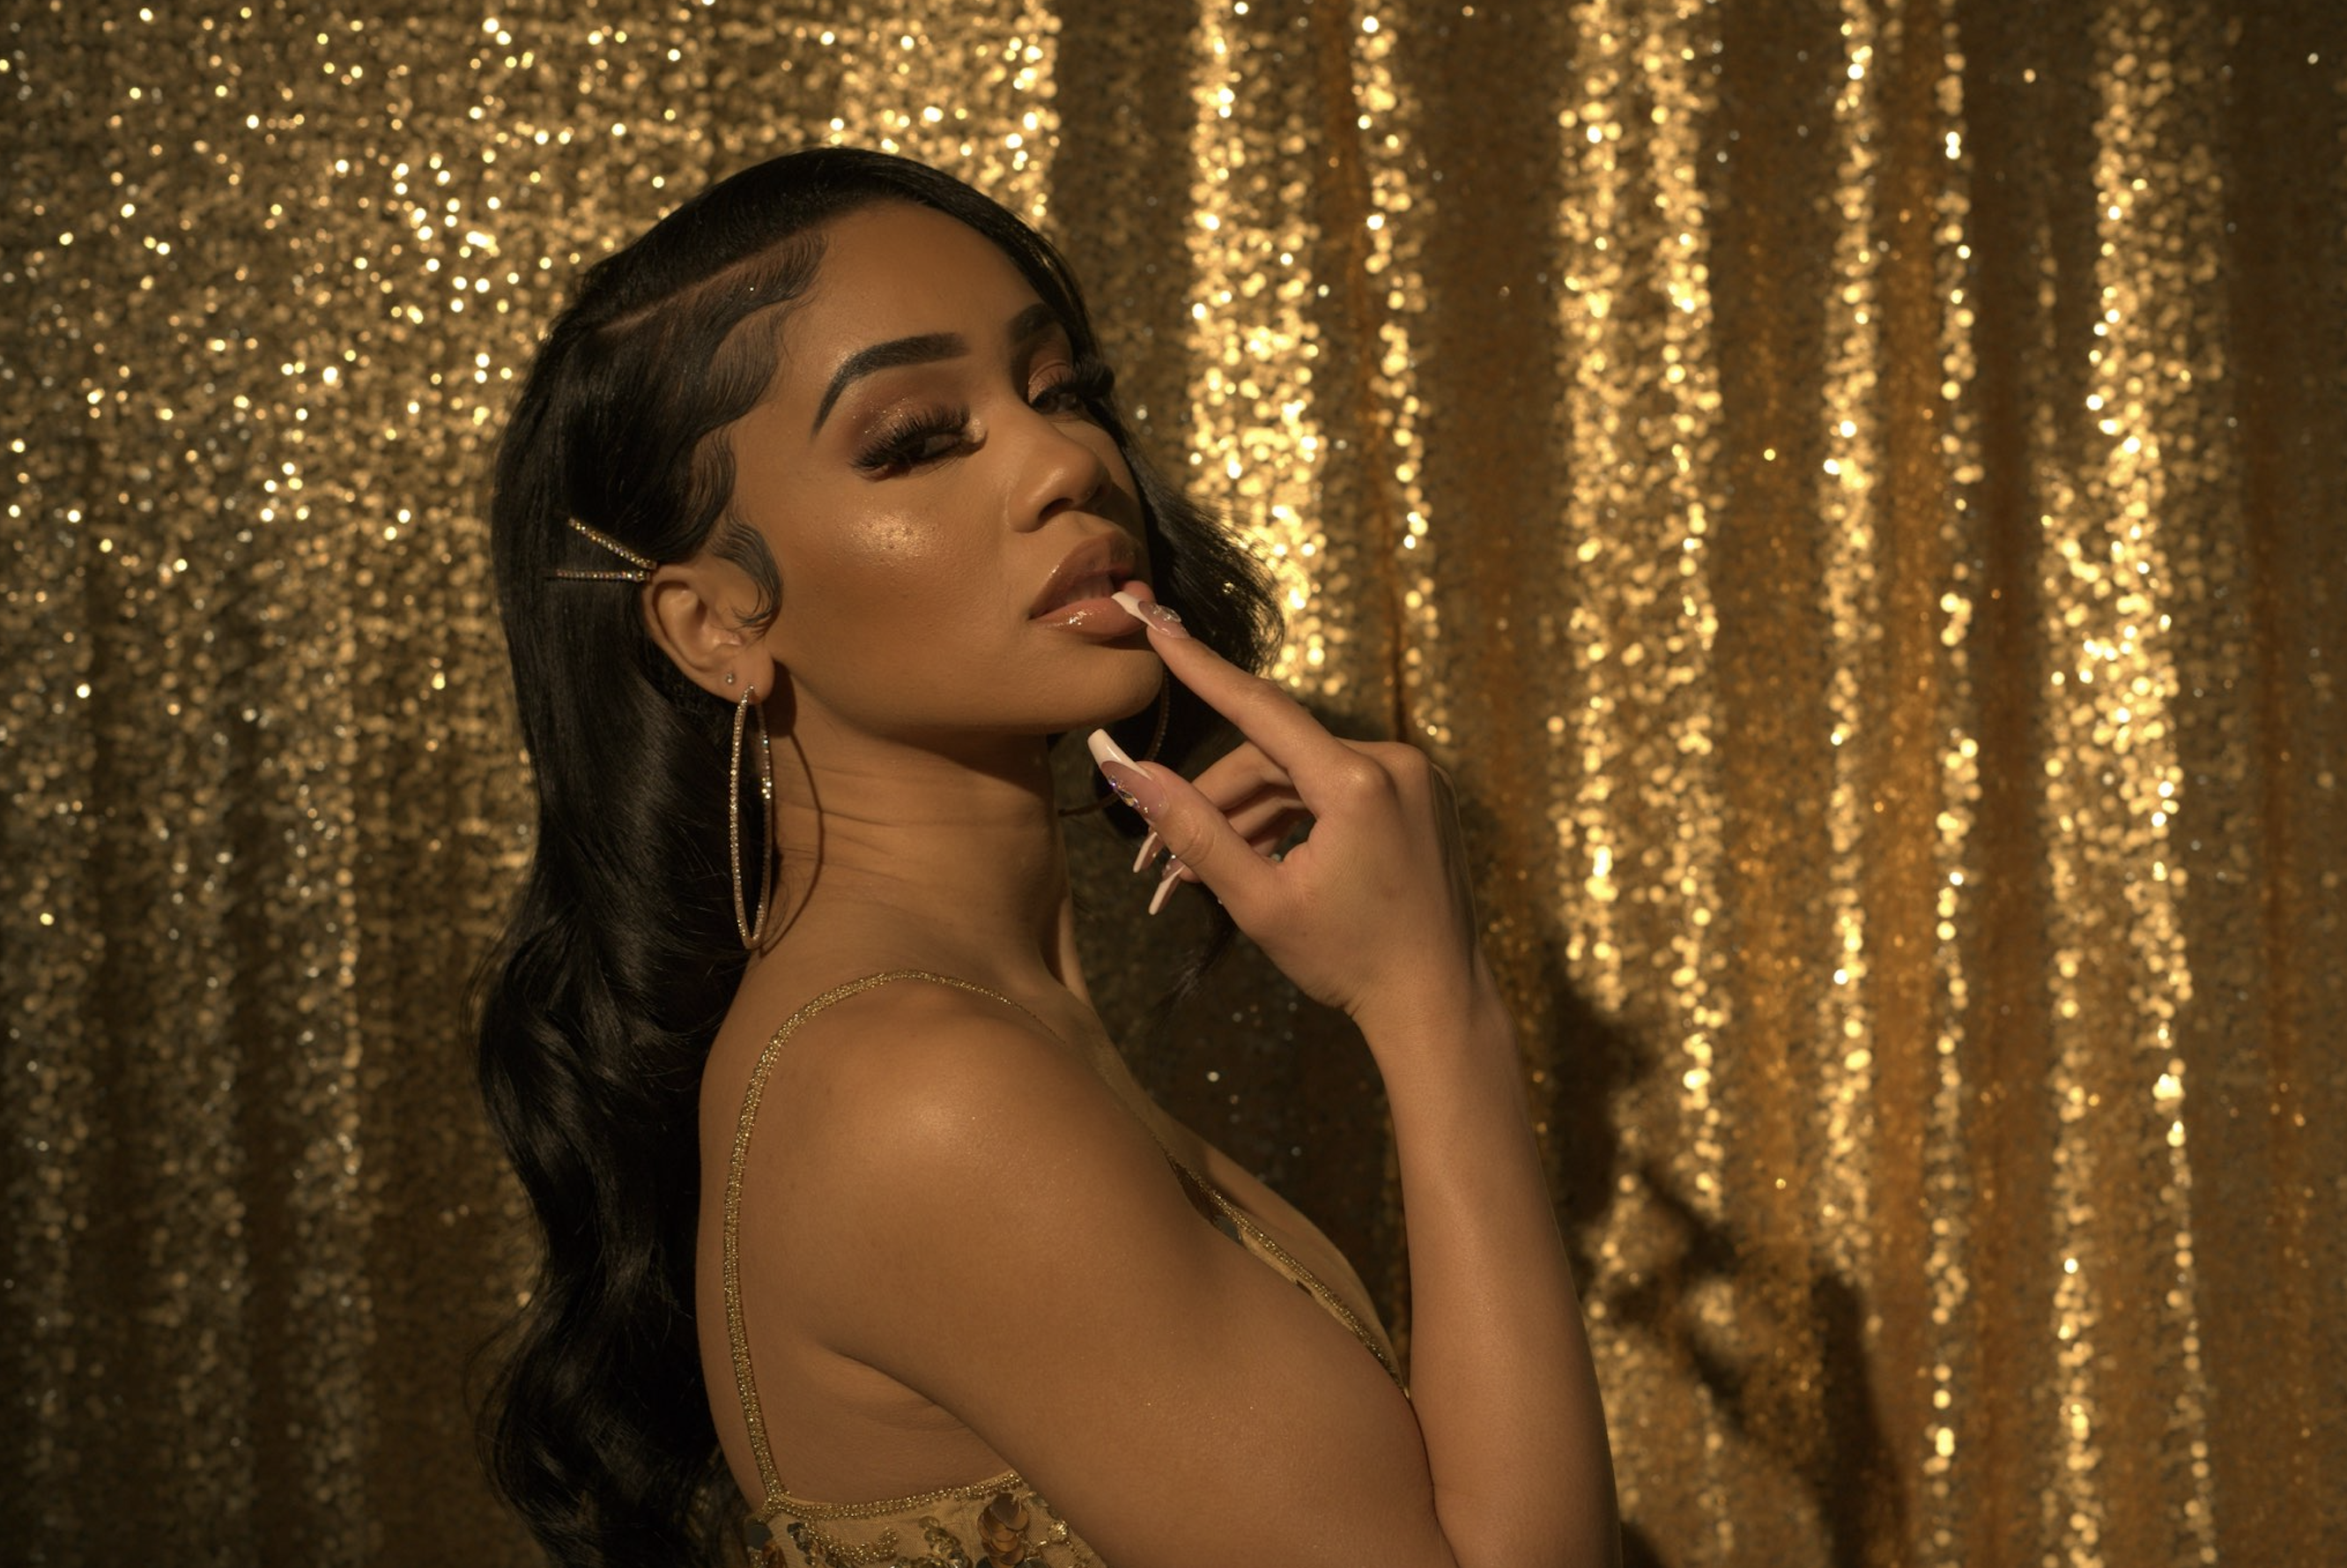 Warner Records Removes Saweetie's Doja Cat Collaboration After She Sounds Off About Premature Release: 'The thirst for clout & $ is real'